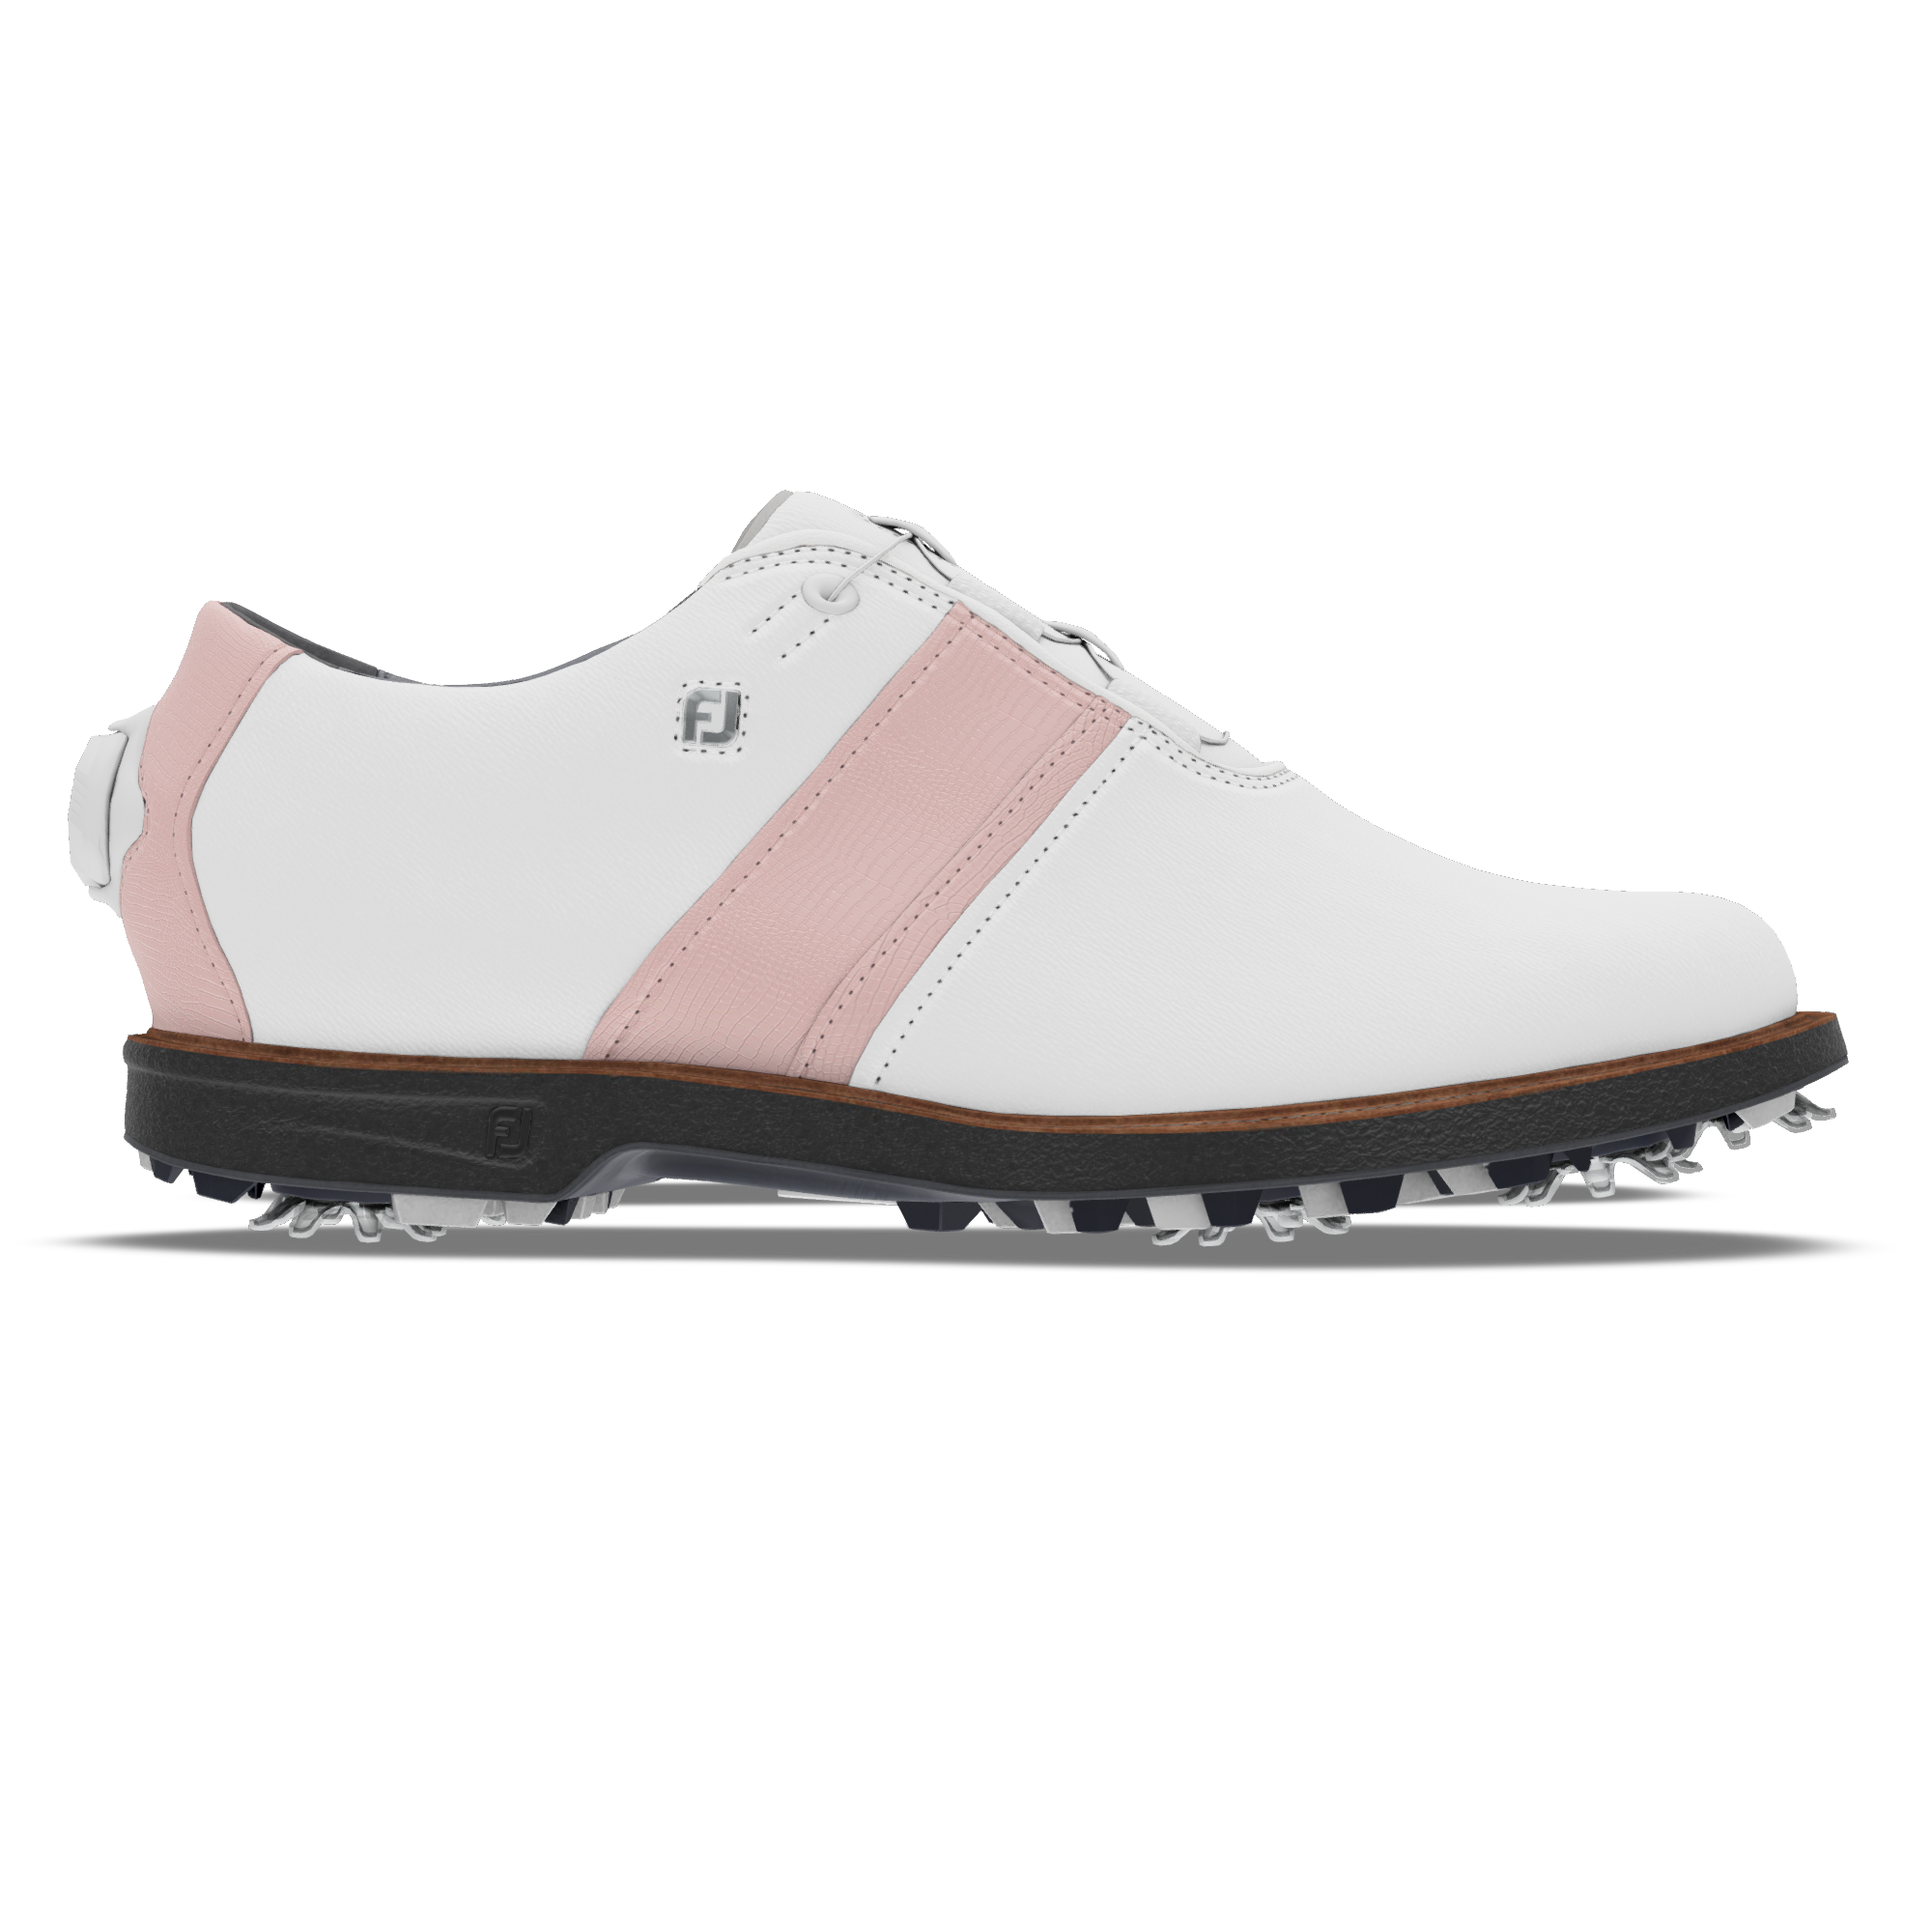 MyJoys Premiere Series - Traditional Women